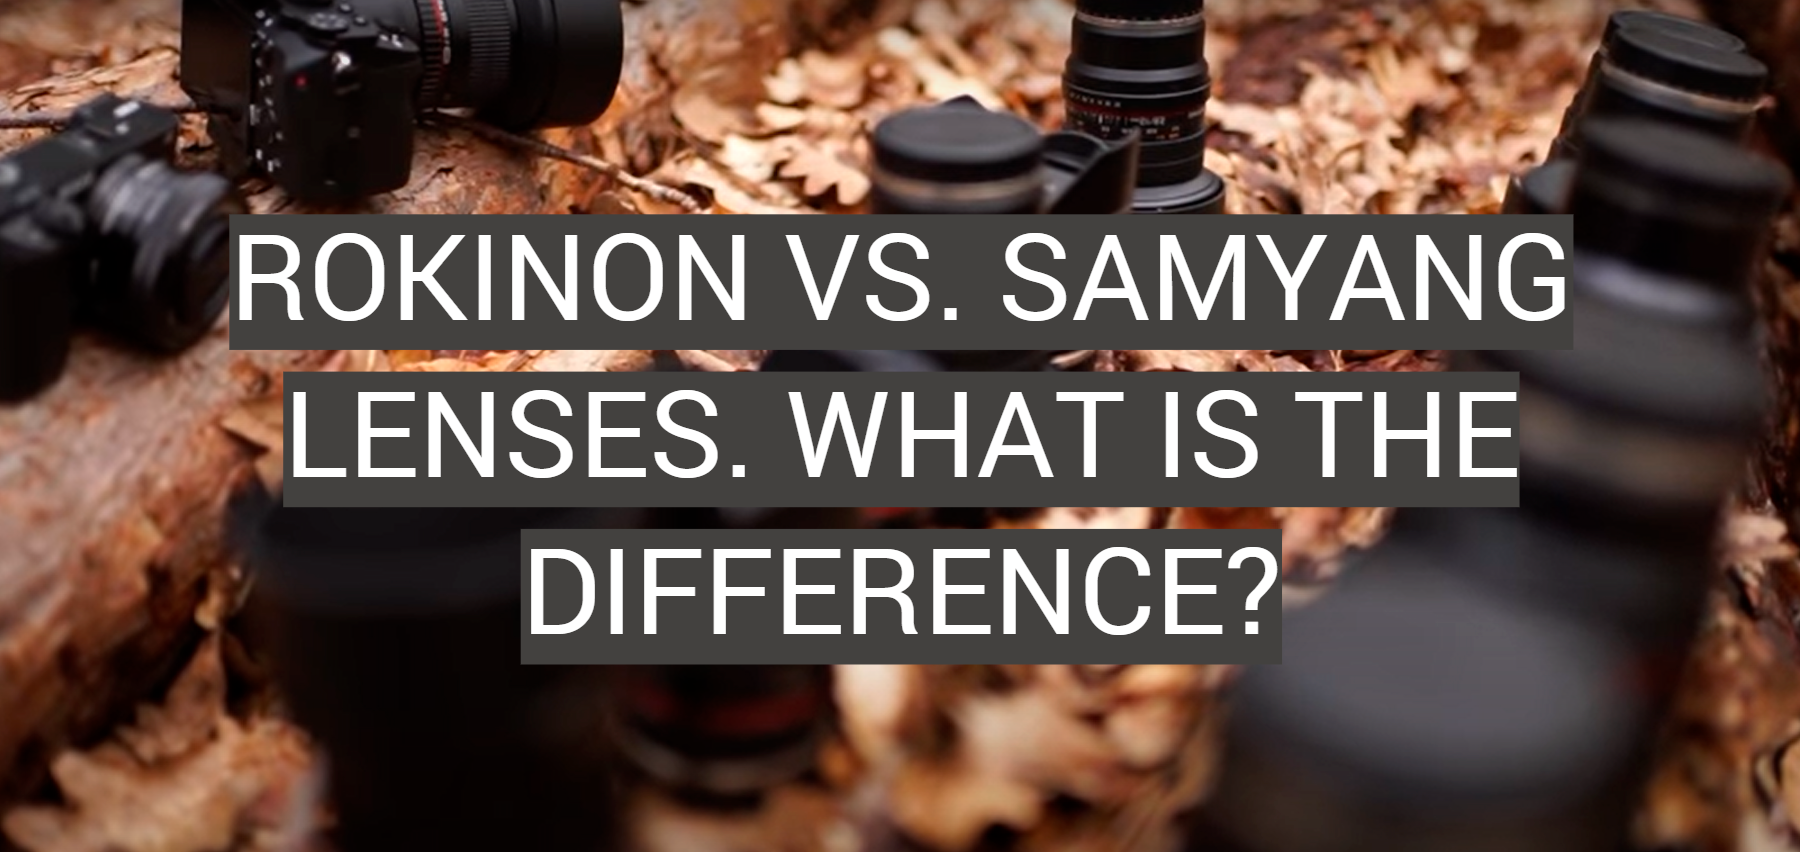 Rokinon vs. Samyang Lenses. What is the Difference?